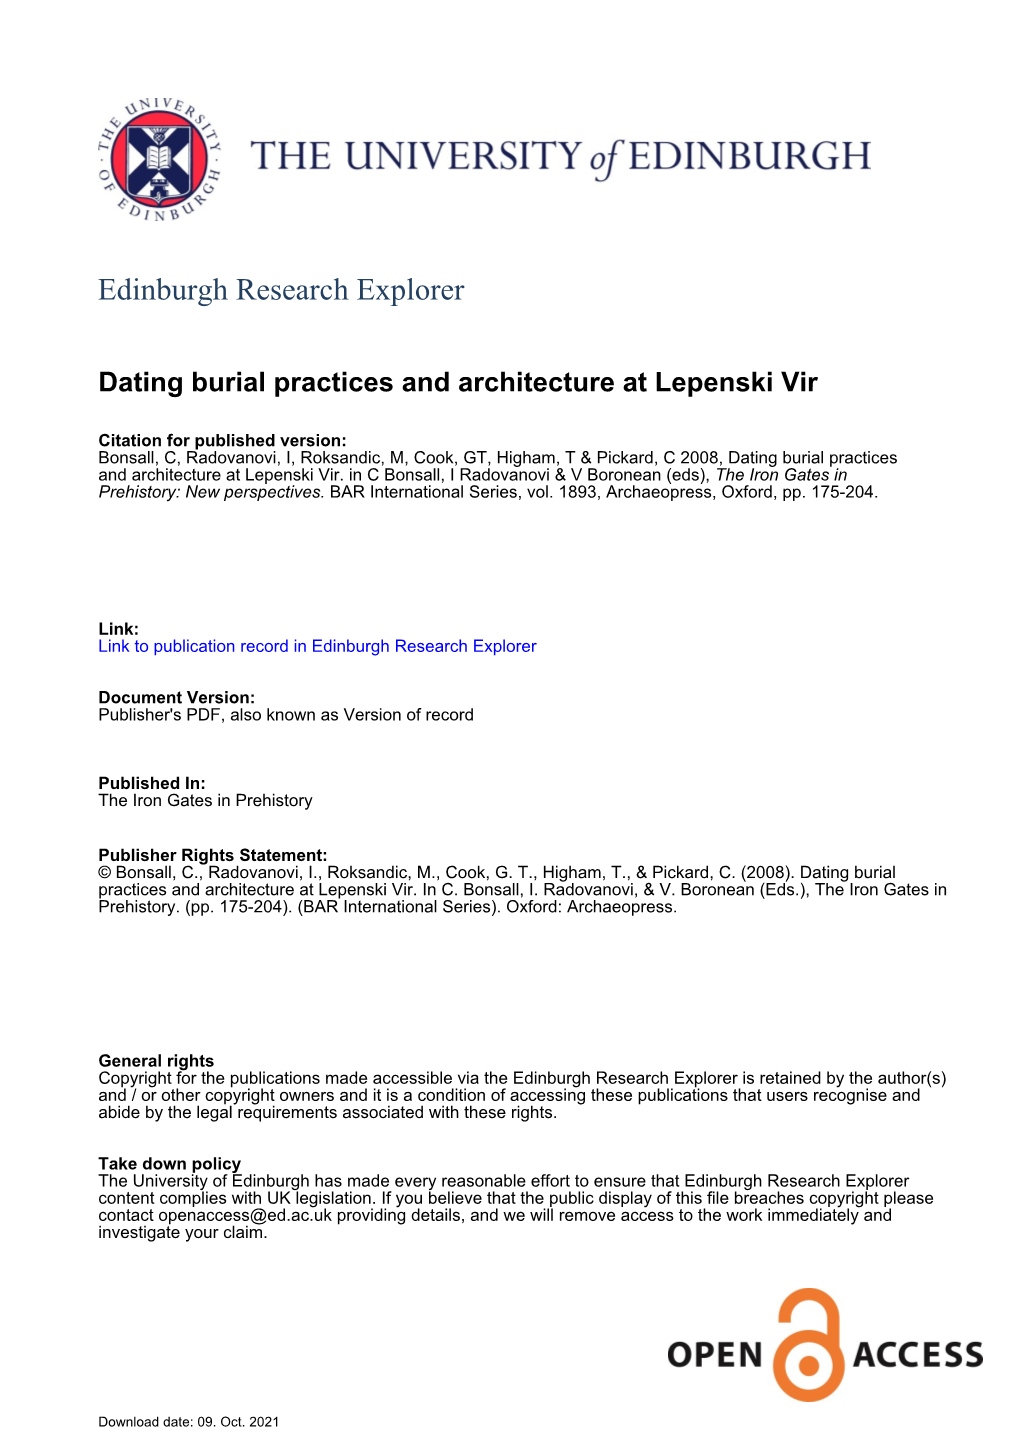 Dating Burial Practices and Architecture at Lepenski Vir